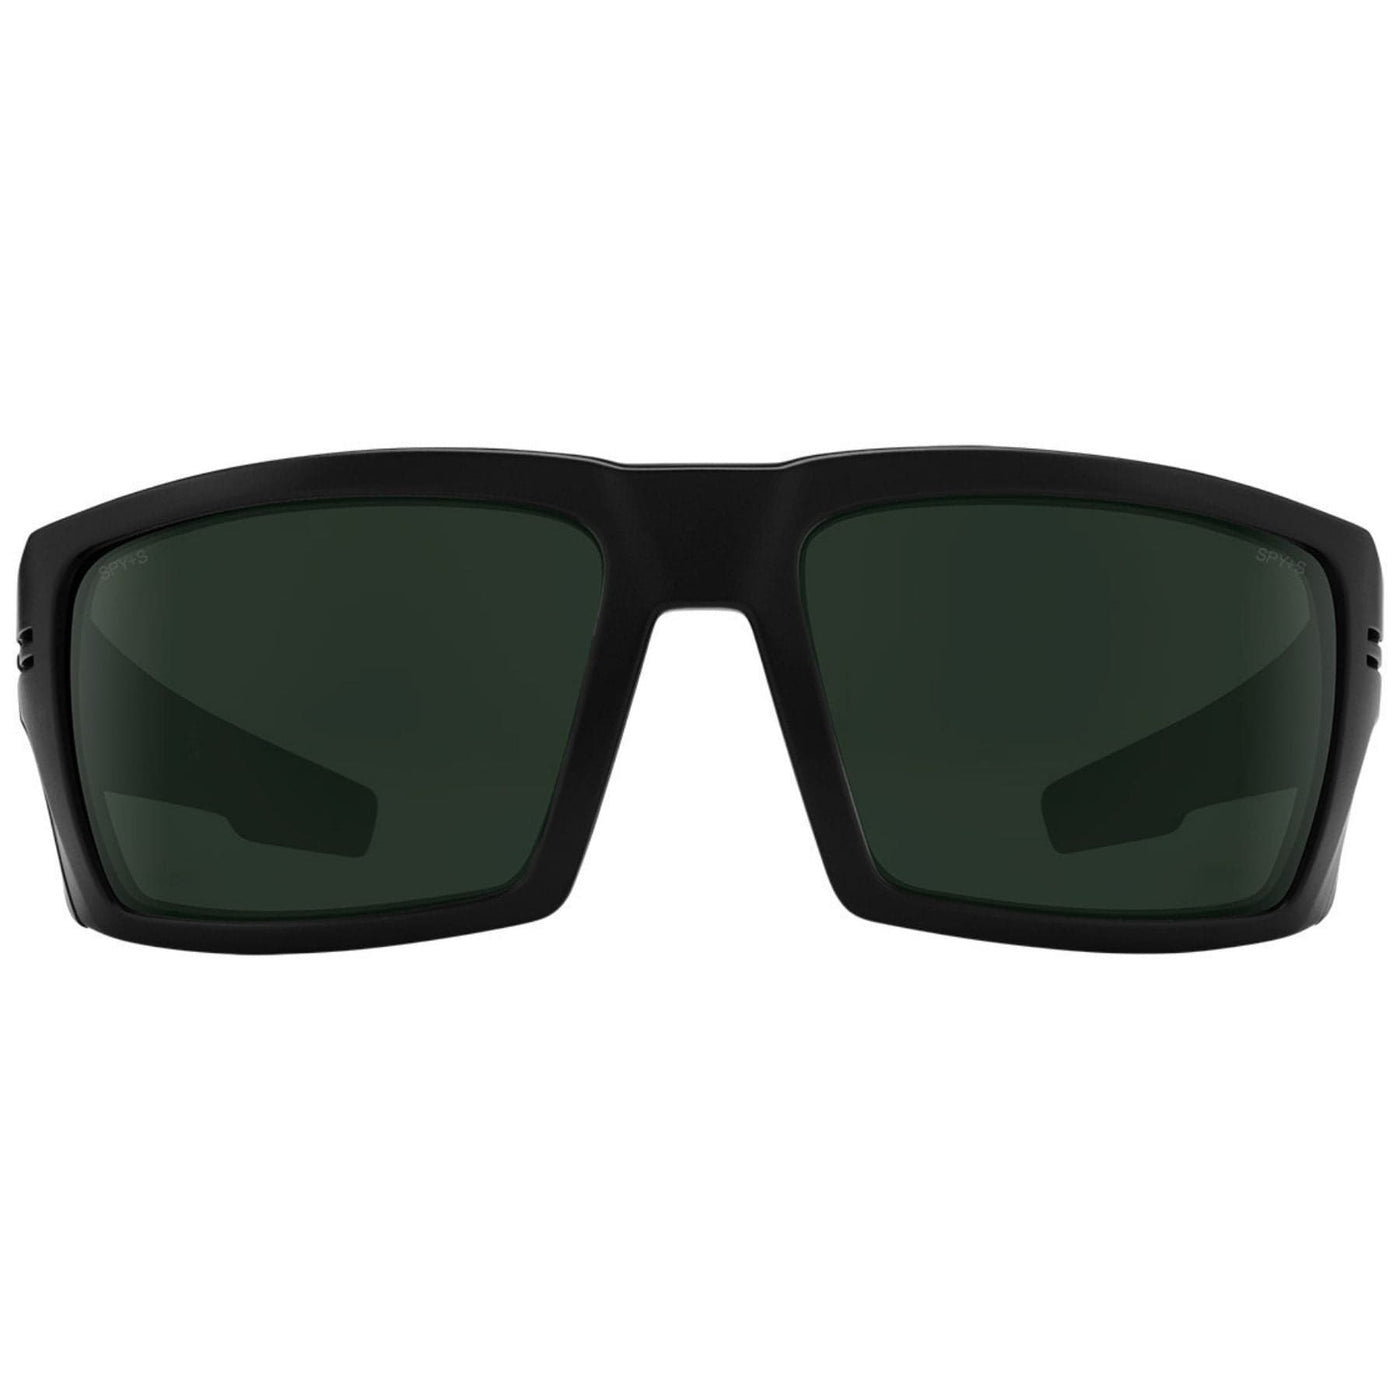 sunglasses for hunting - gray/green